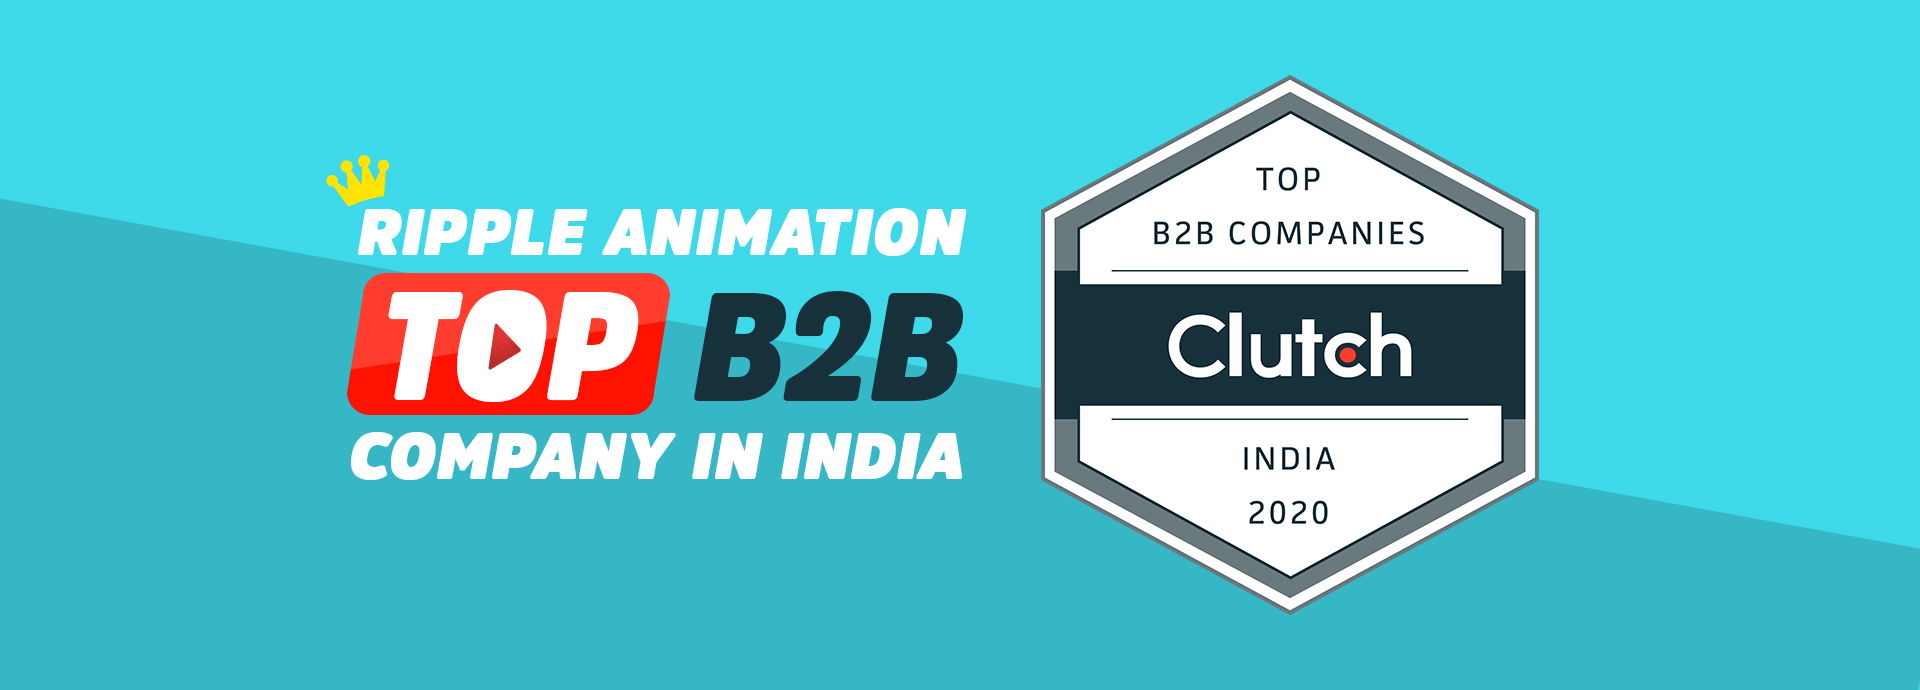 Ripple Animation Named Top B2B Company In India - Explainer Video Blogs |  Ripple Animation